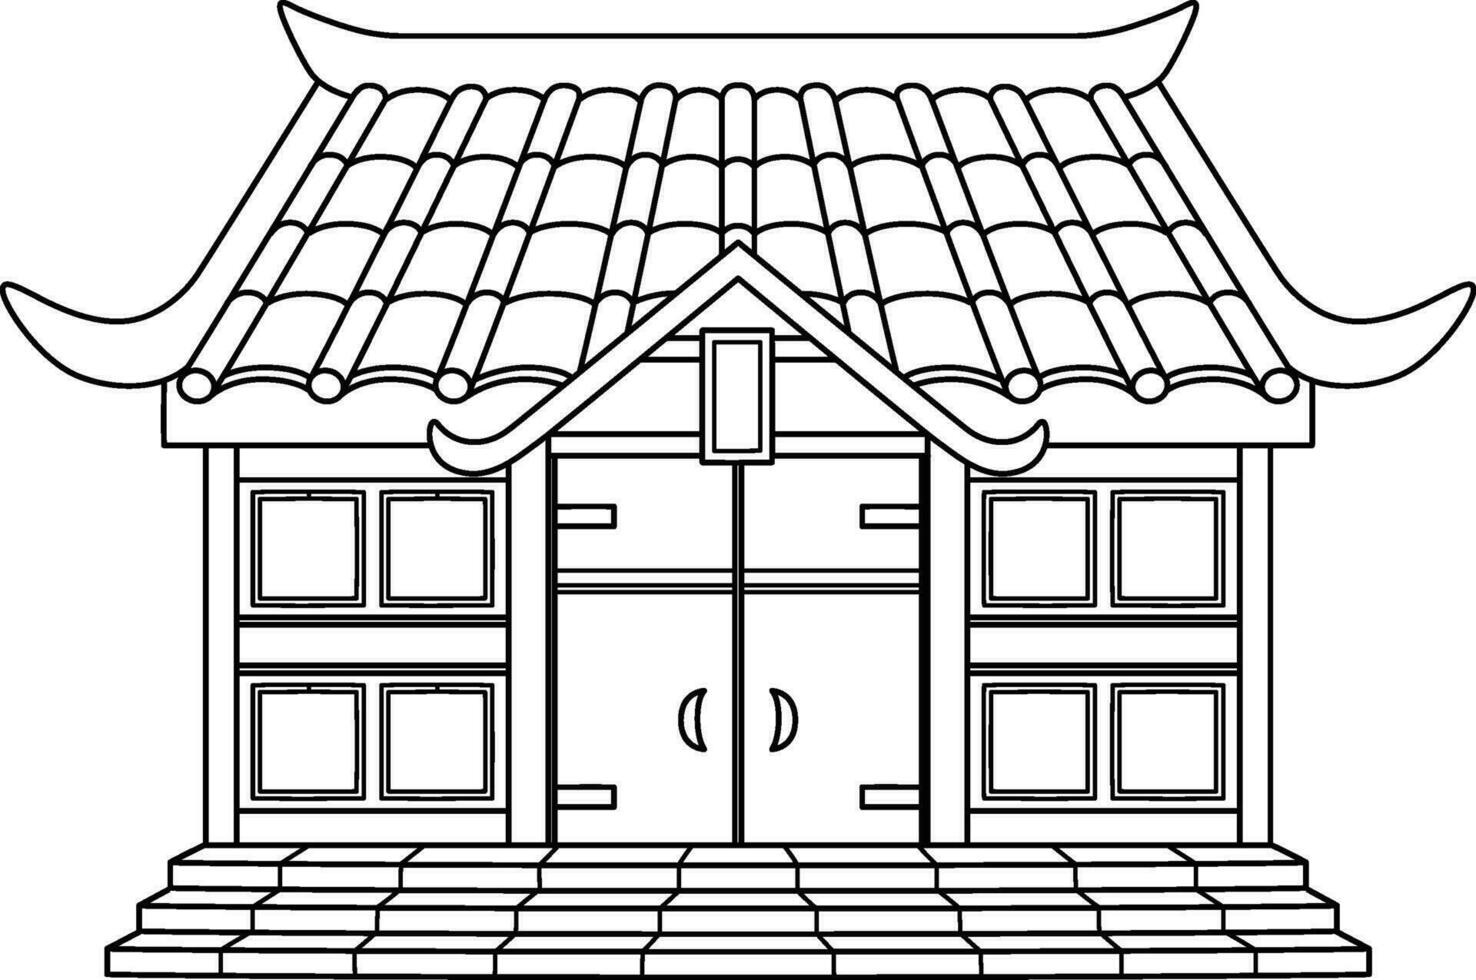 Ninja House Isolated Coloring Page for Kids vector